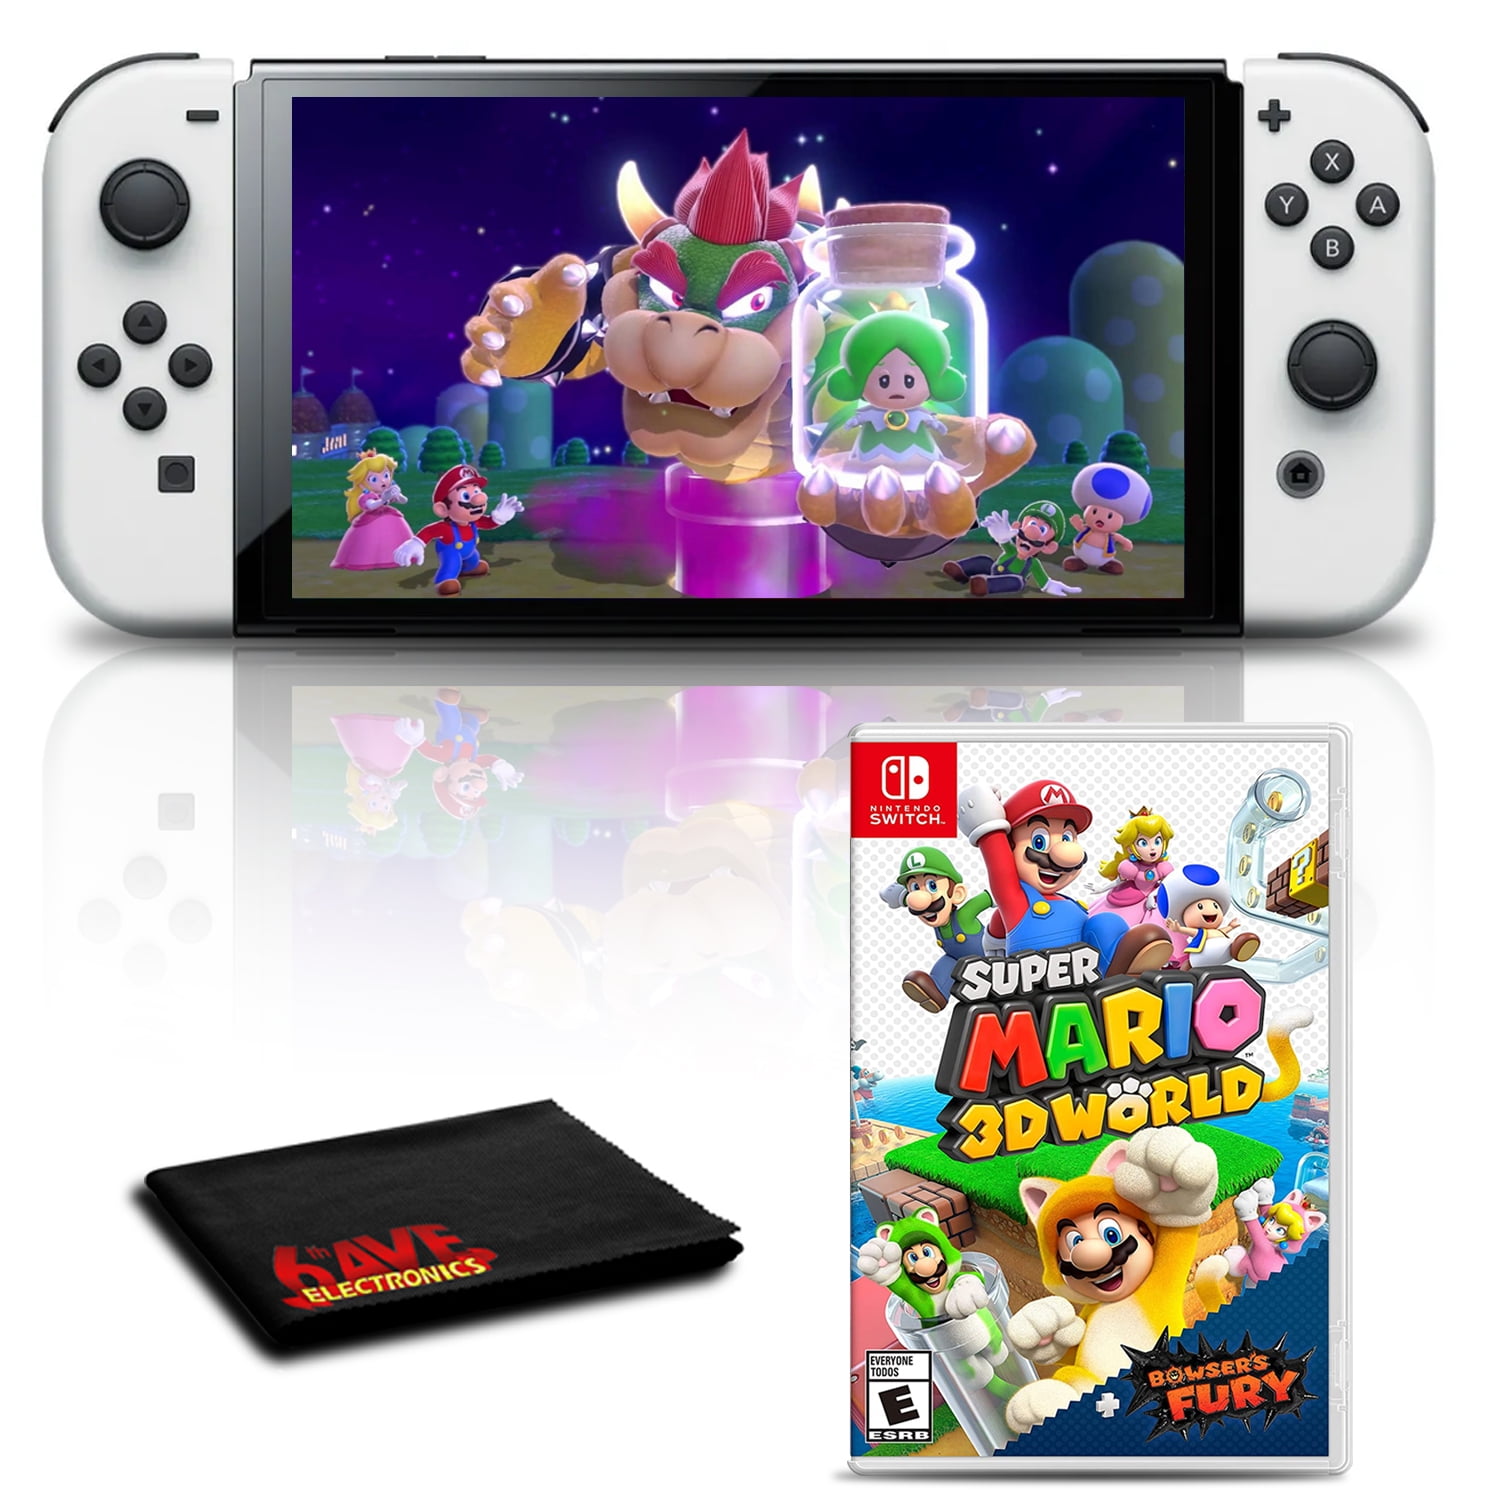 Nintendo Switch OLED White with Super Mario 3D World Plus Bowser's 